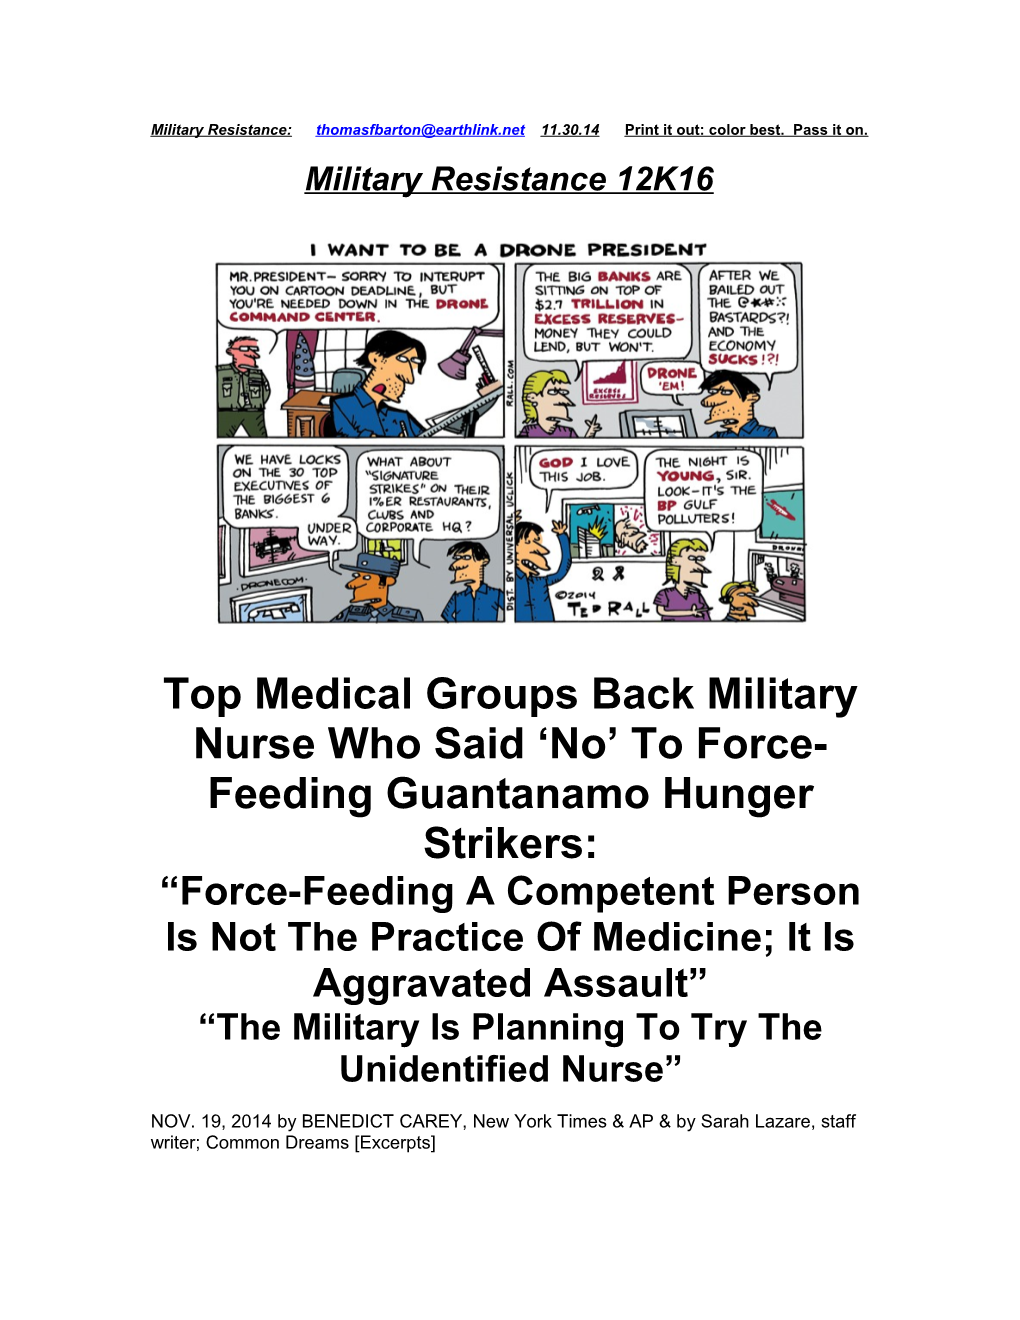 Force-Feeding a Competent Person Is Not the Practice of Medicine; It Is Aggravated Assault